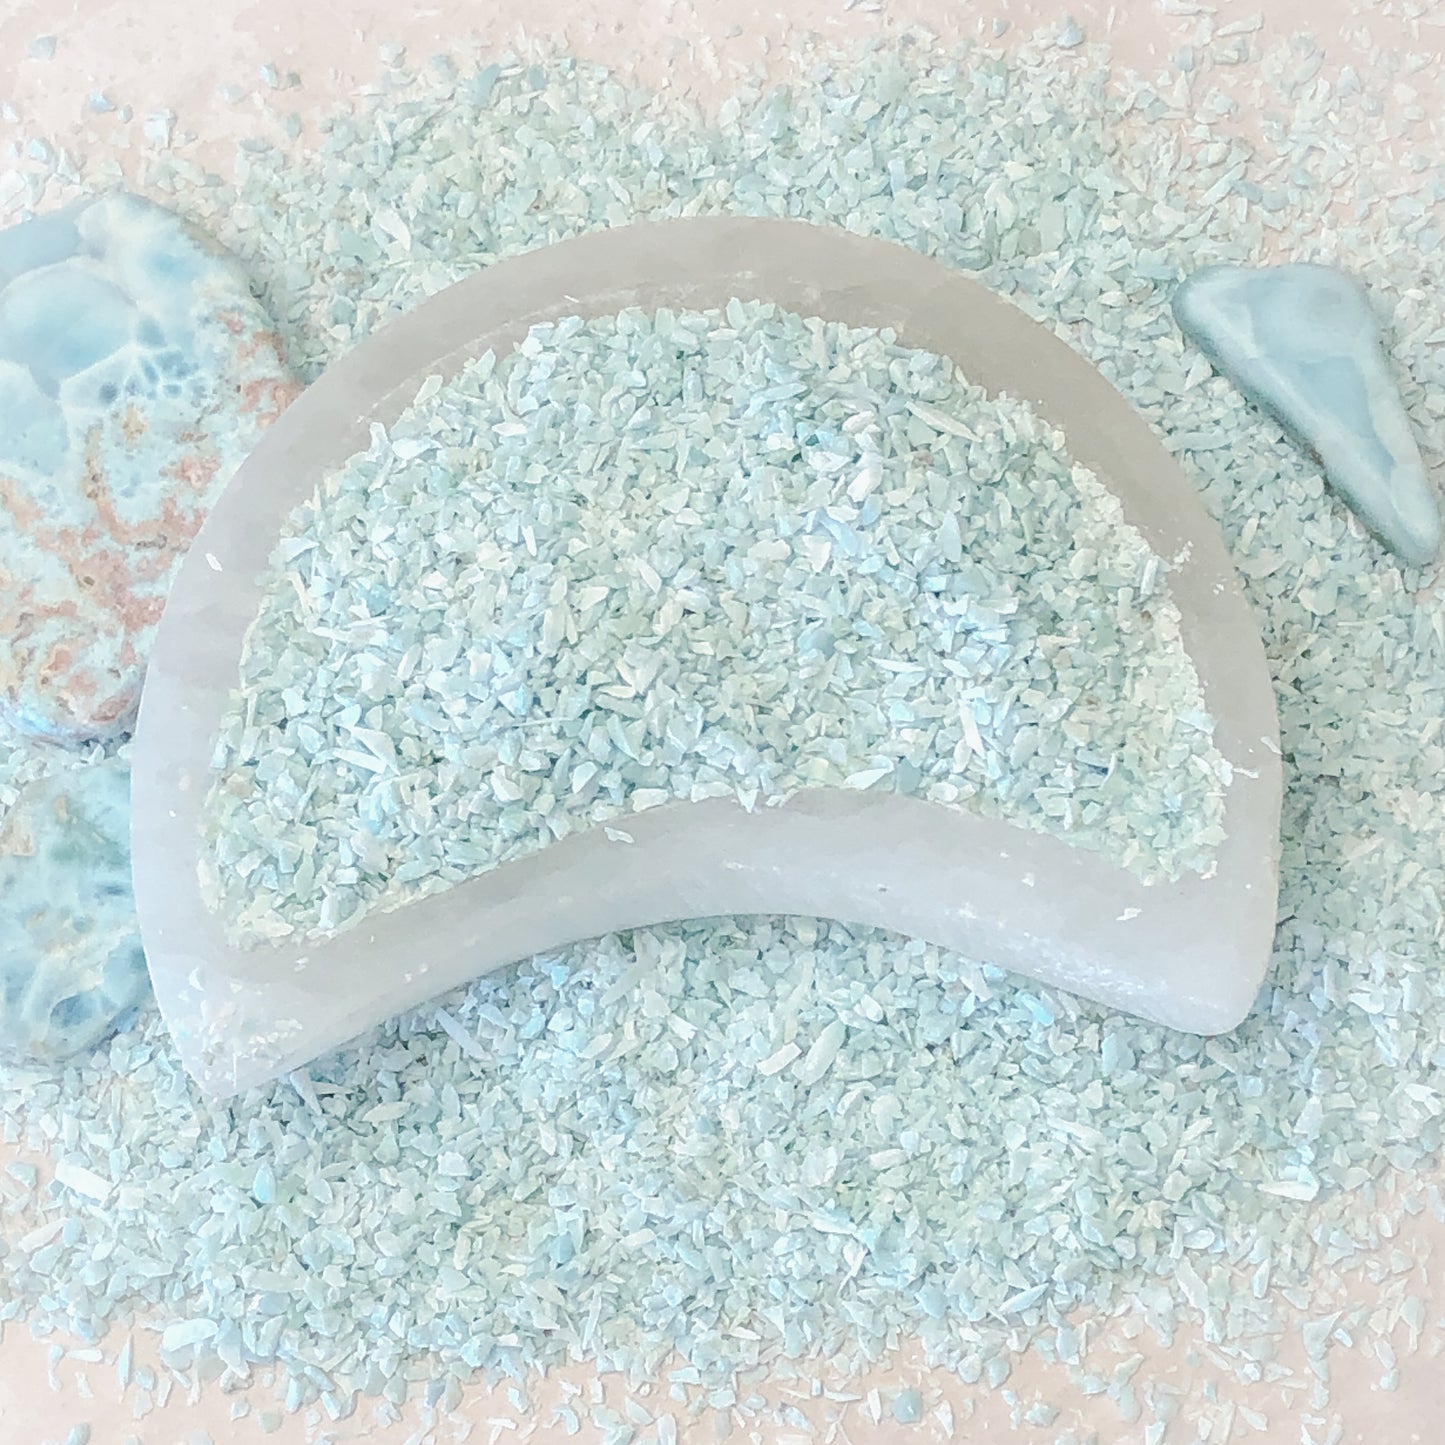 Crushed Baby Blue Larimar from the Dominican Republic, Medium Crush, Sand Size, 2mm - 0.25mm